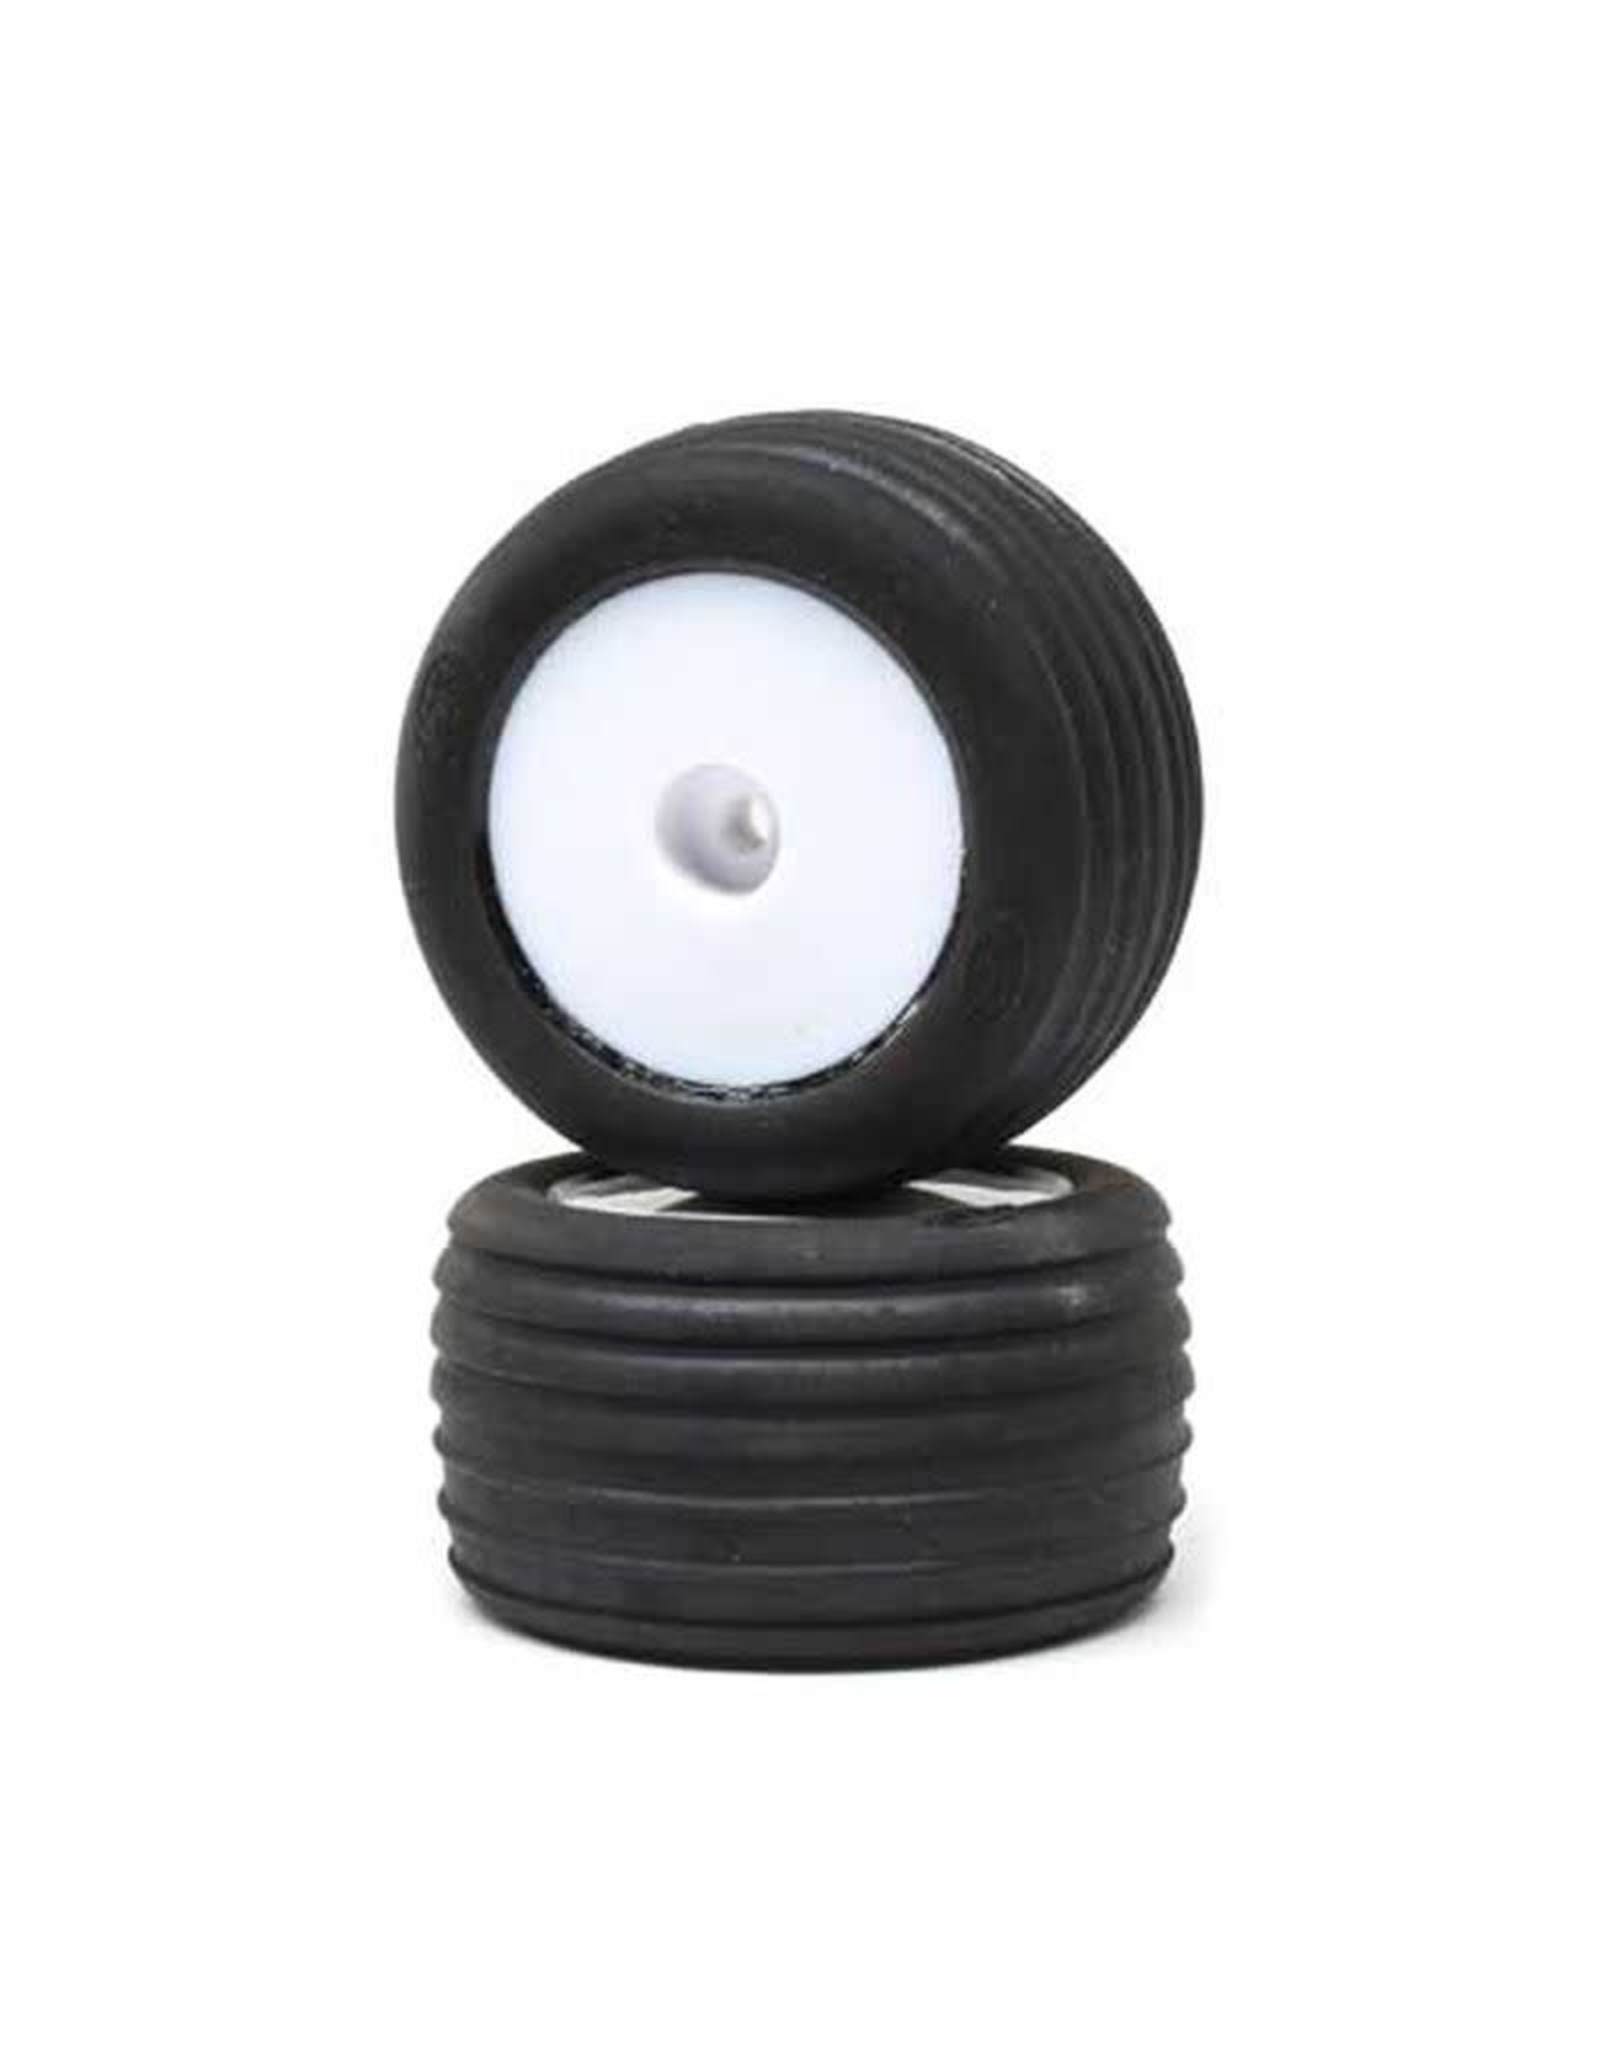 LOSI Directional Tires, FR, Mntd, Wht (2): Mini-T 2.0